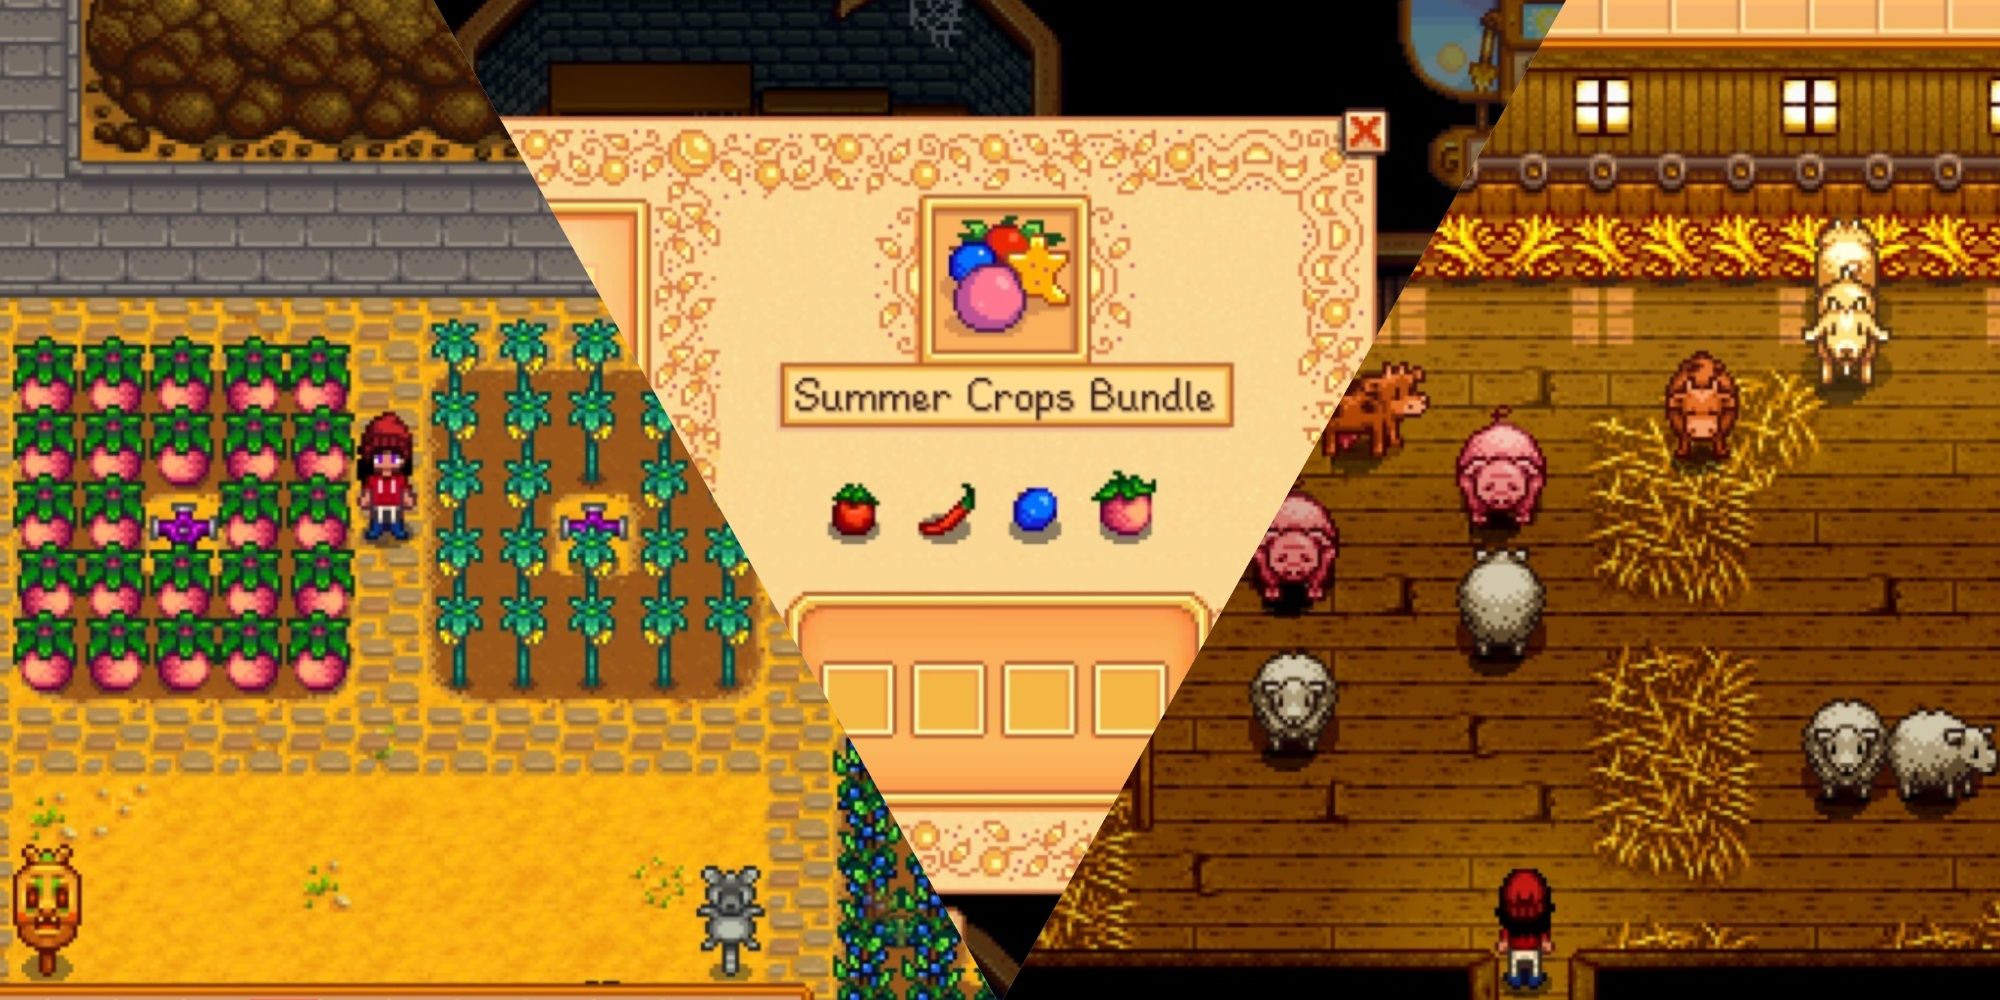 Stardew Valley images with crops, summer bundle, and animals in a barn